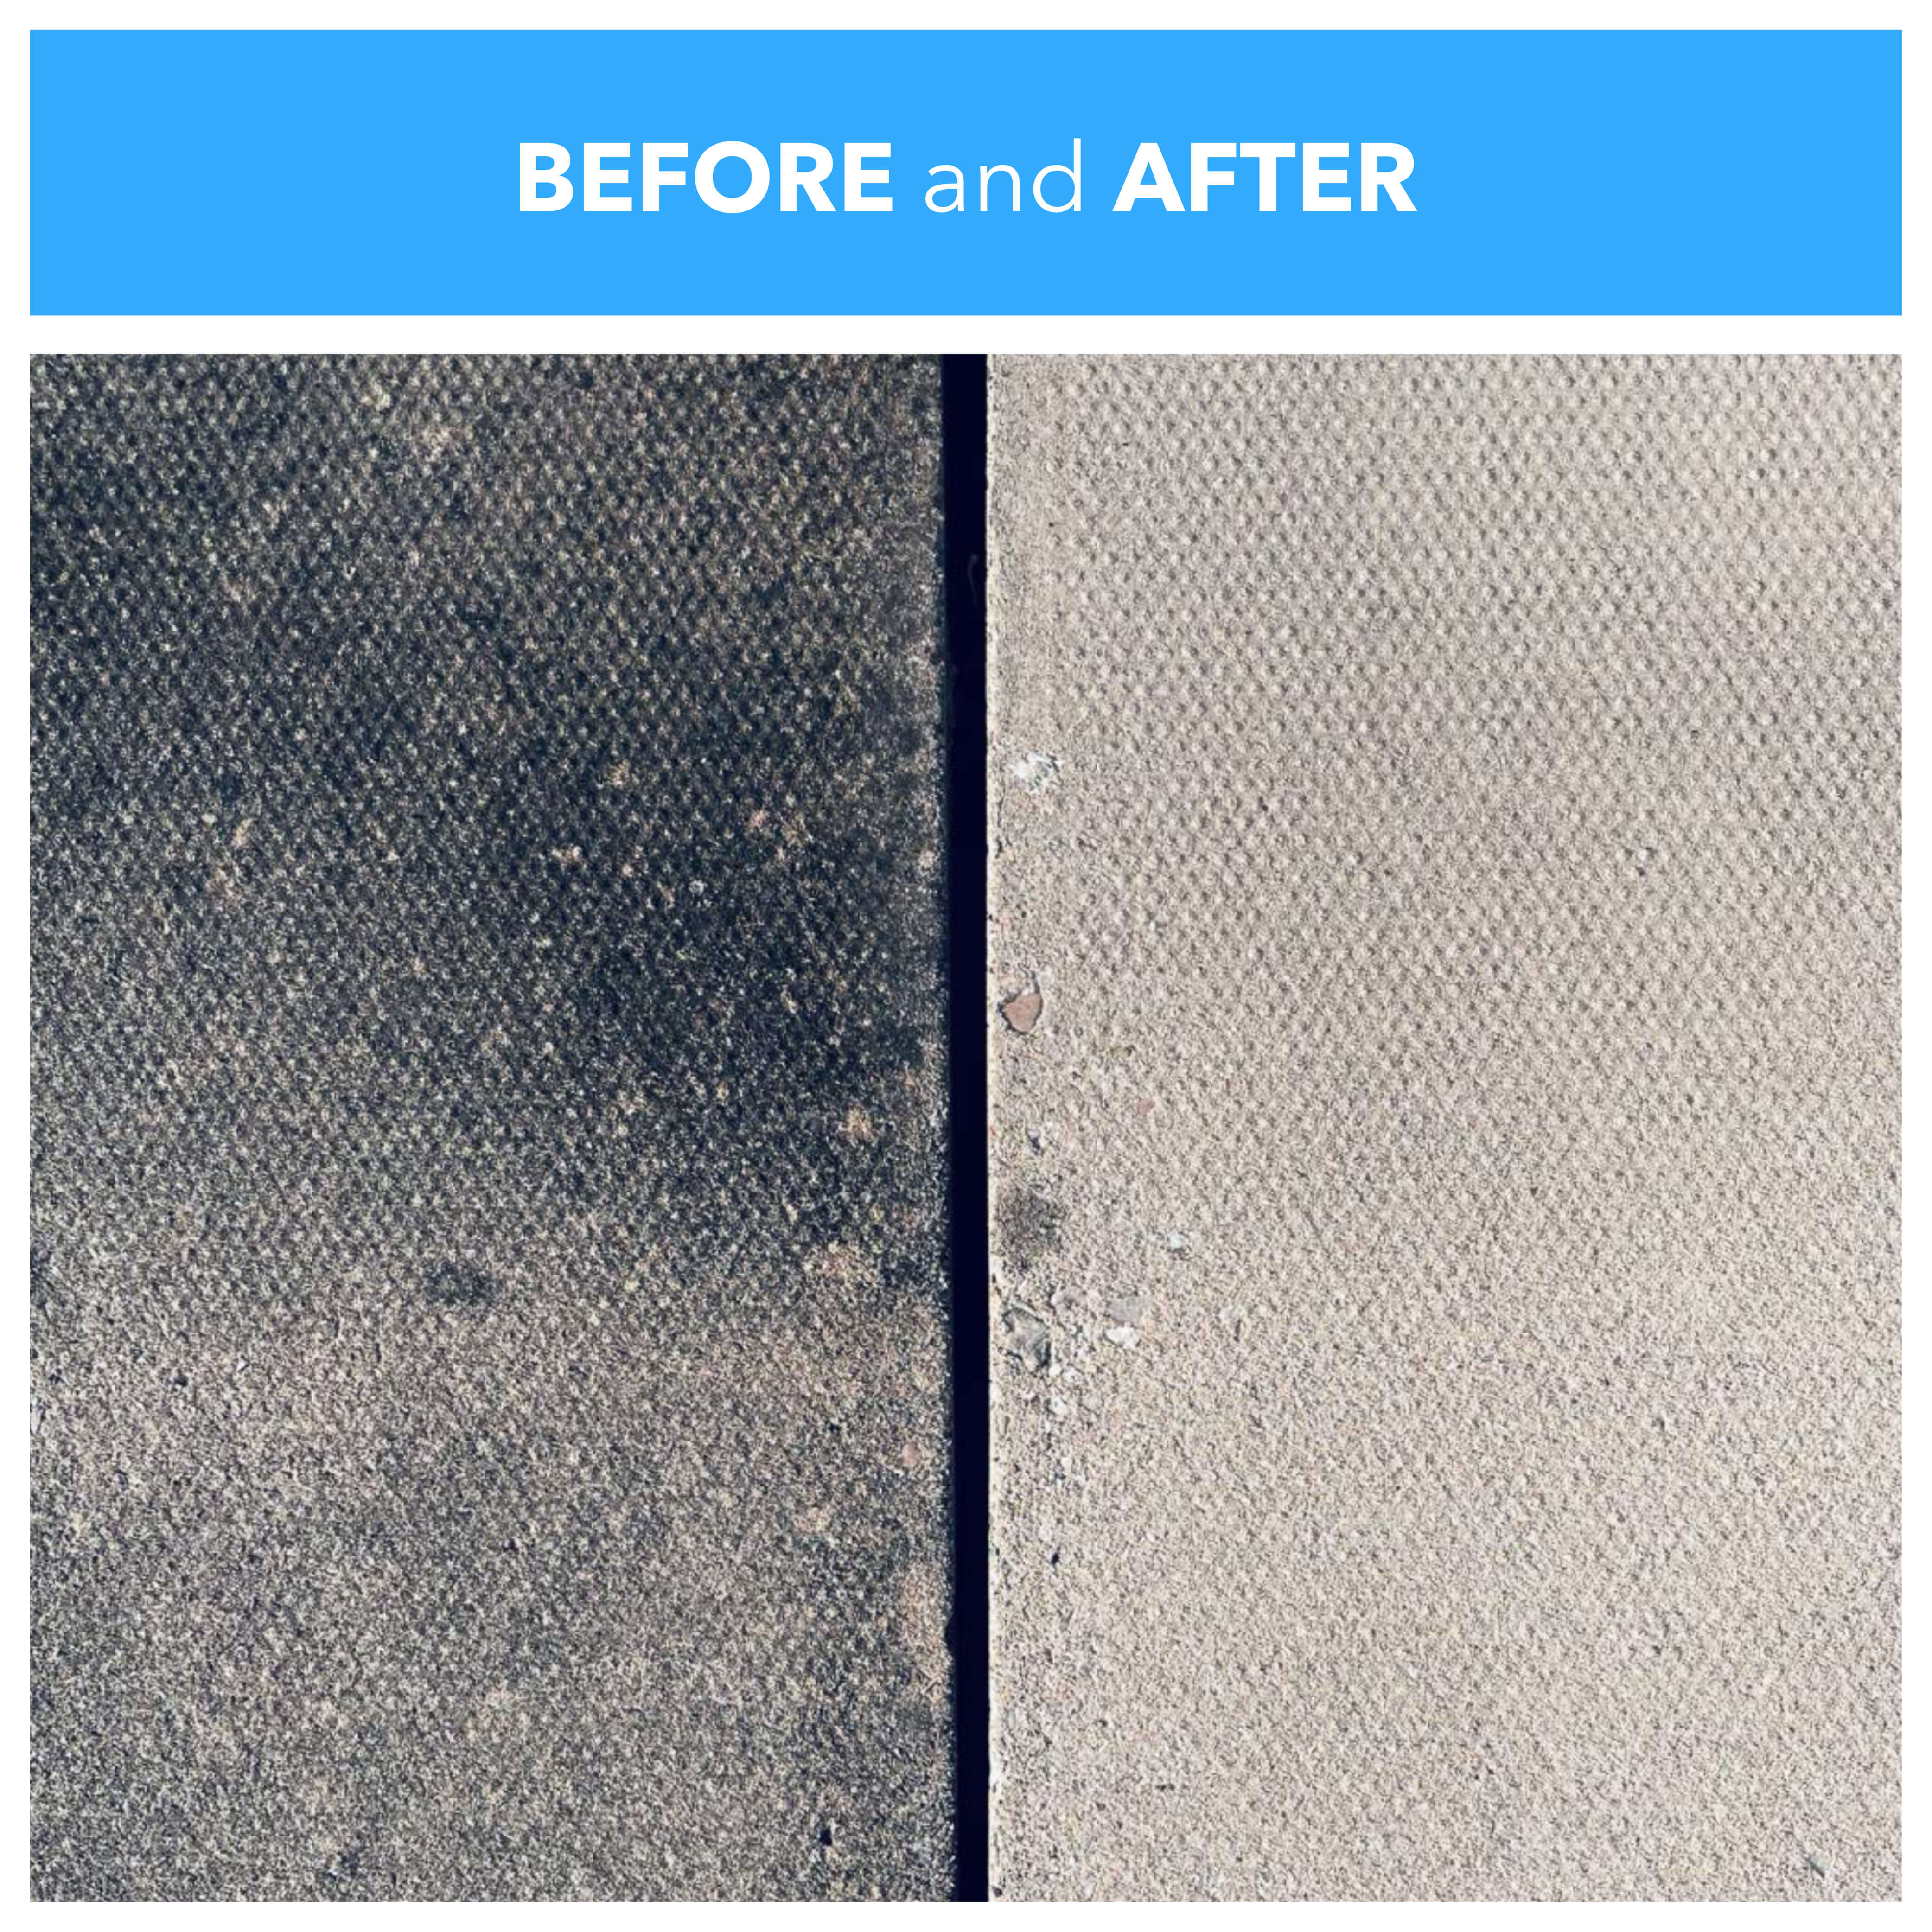 Before and after using One Chem Black Spot Remover